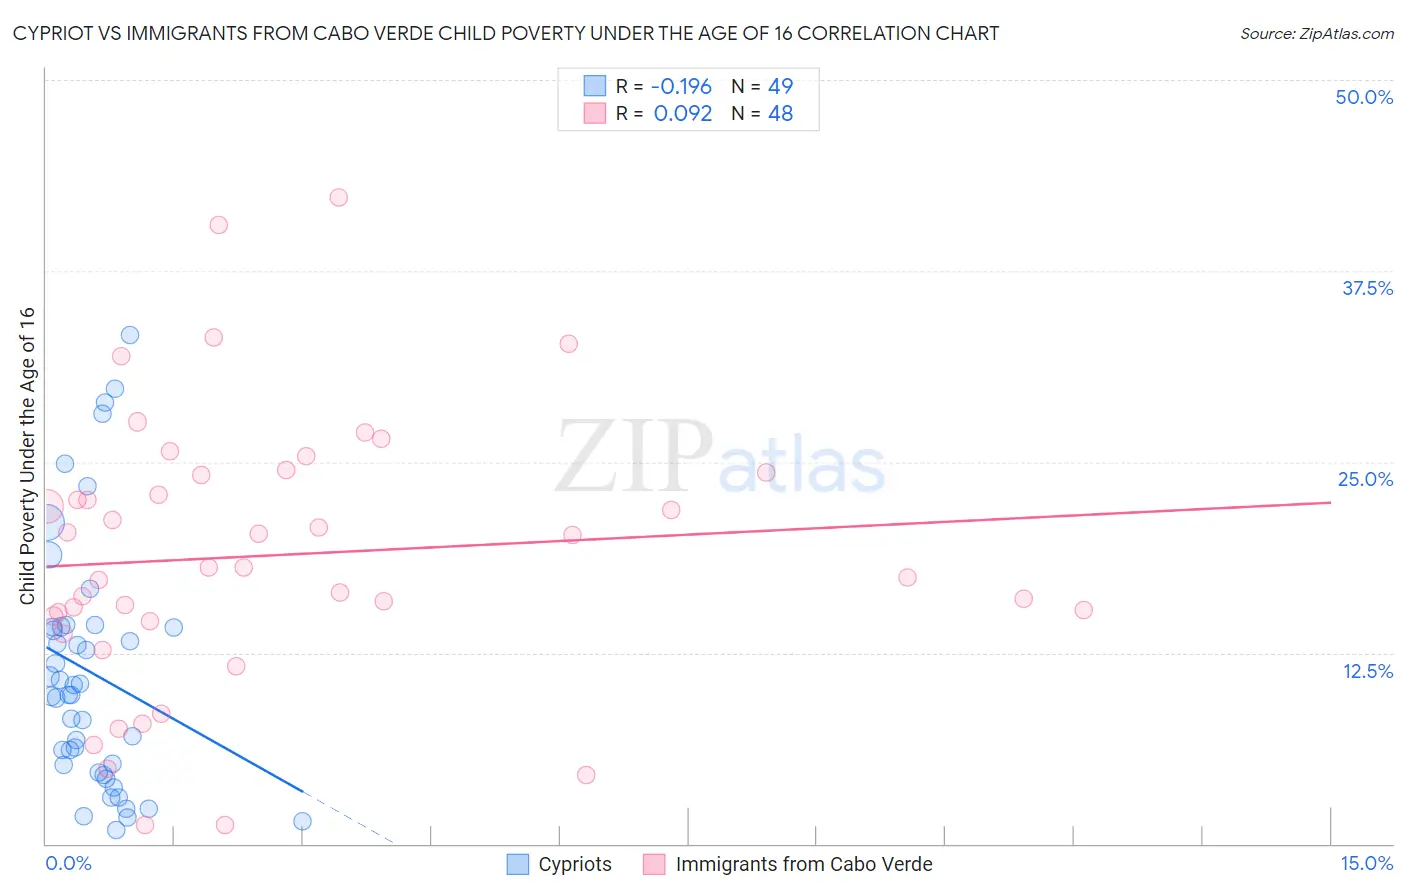 Cypriot vs Immigrants from Cabo Verde Child Poverty Under the Age of 16